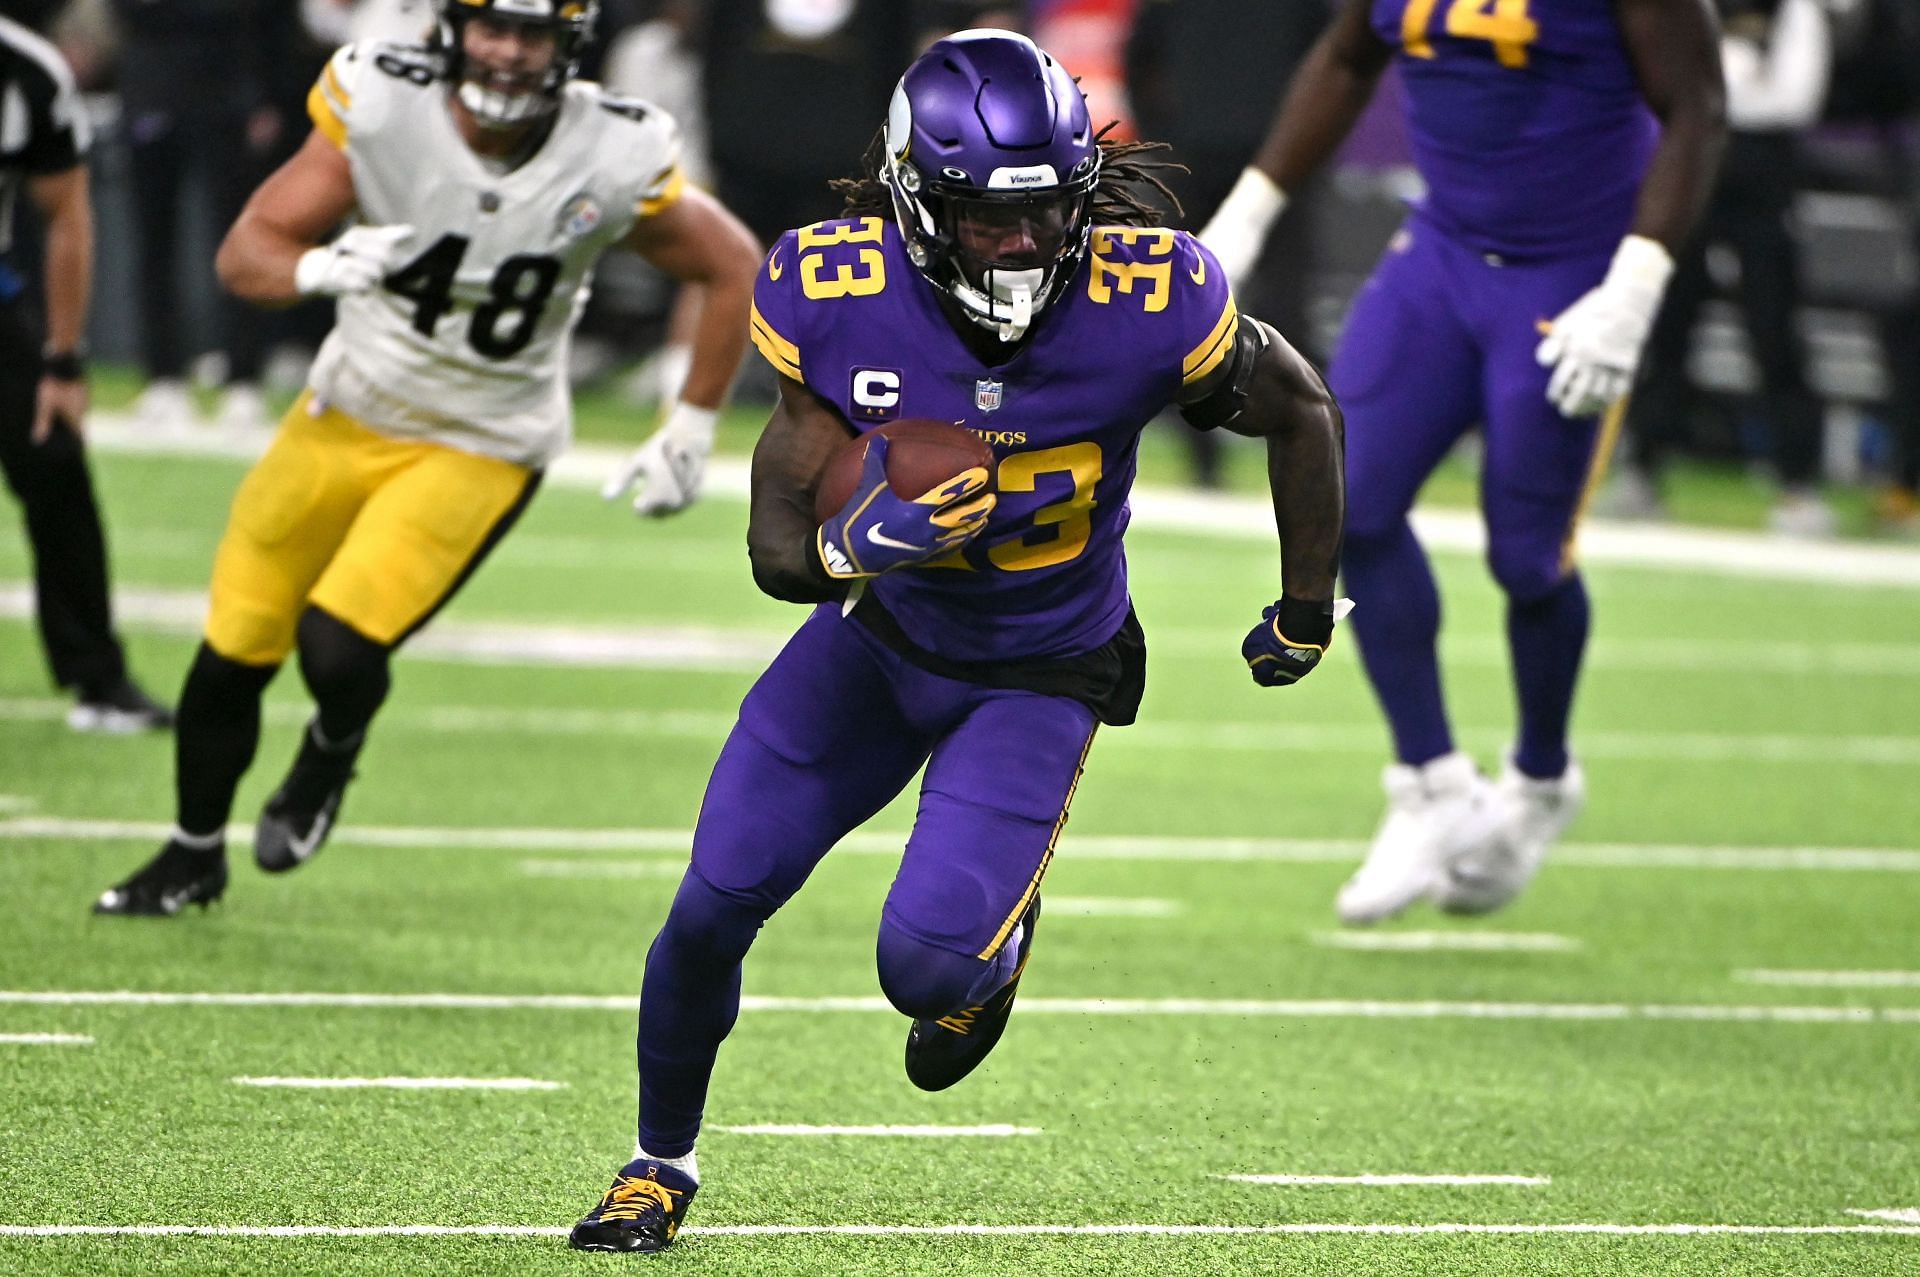 NFL Stats Leader 2021 Who has the most rushing yards heading into Week 18?